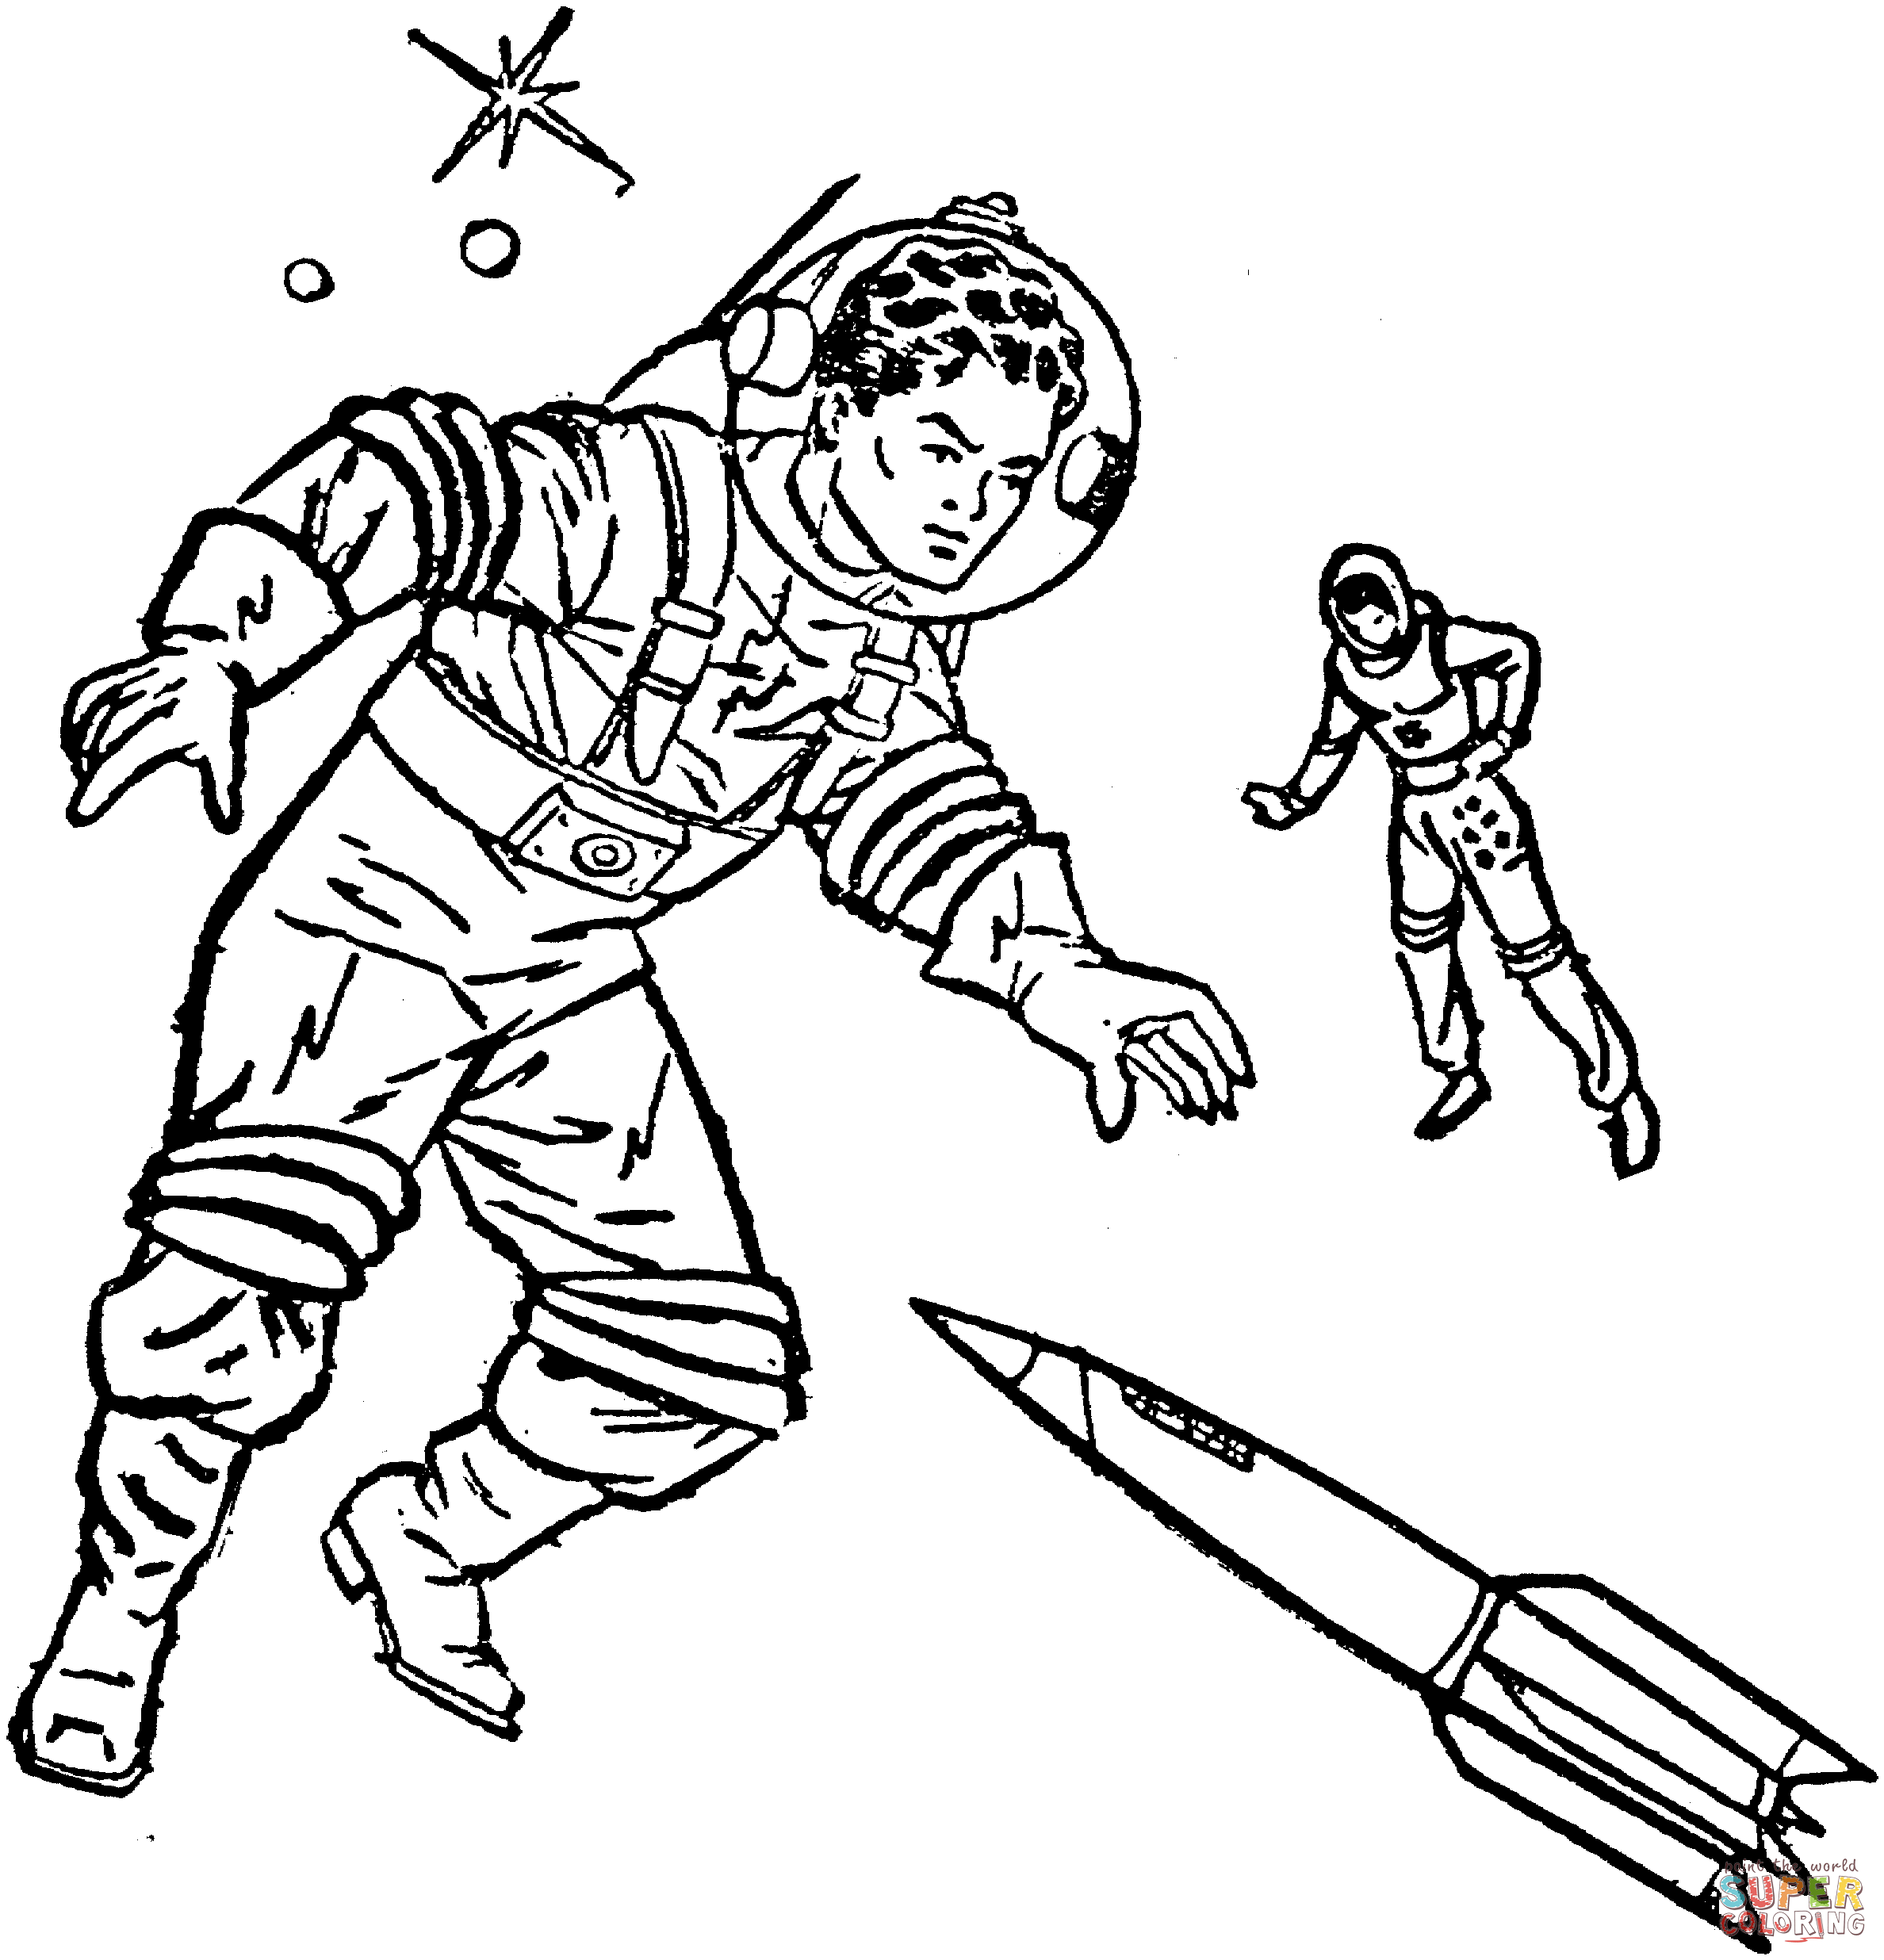 Cosmonauts in space coloring page | Free Printable Coloring Pages